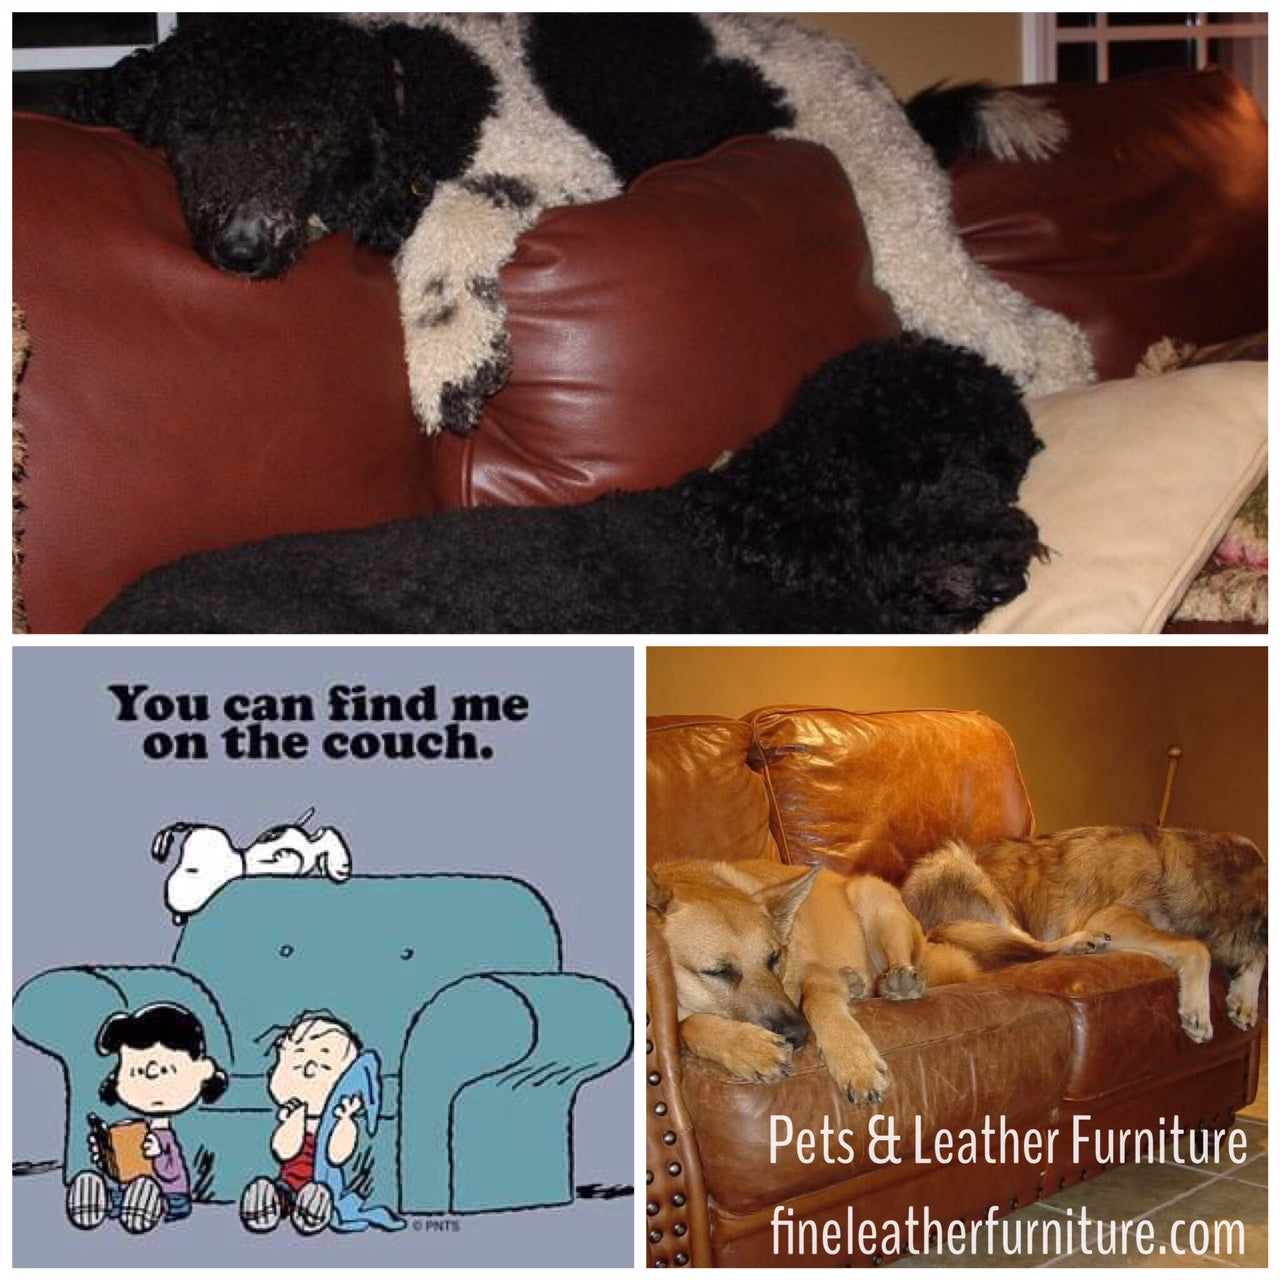 Leather is pet friendly furniture